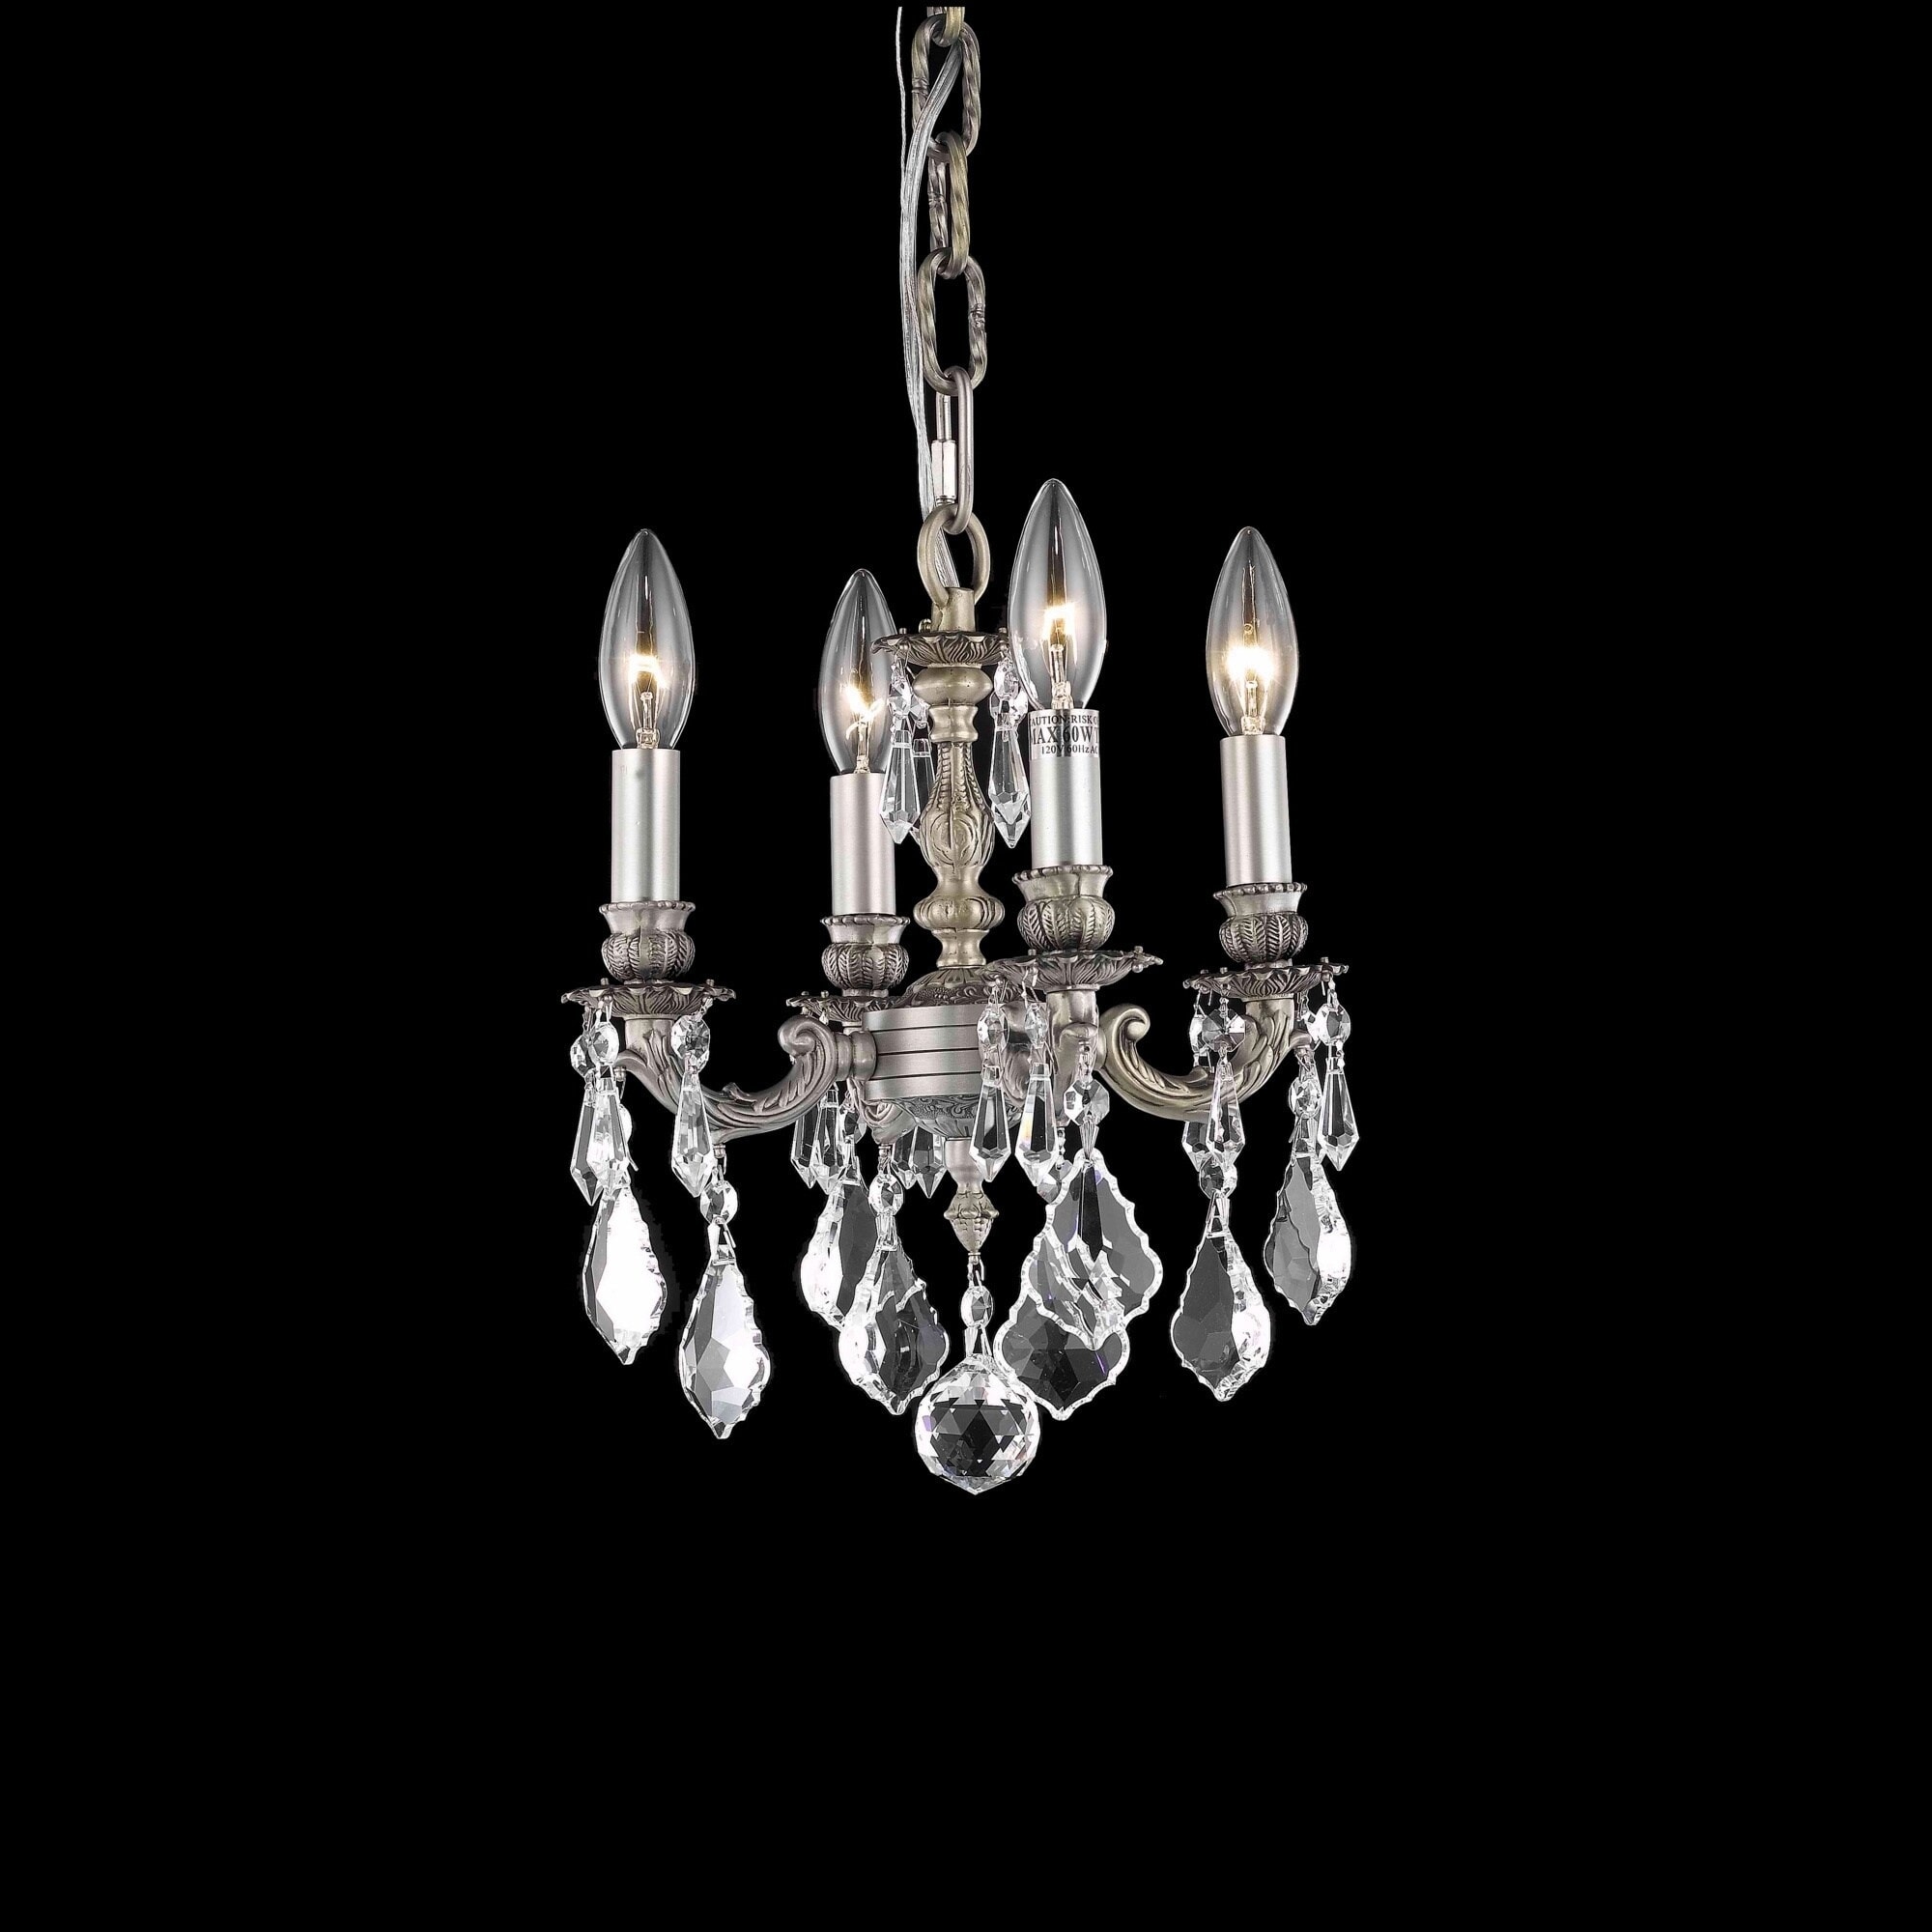 Christopher Knight Home Crystal 4 light Pewter Chandelier